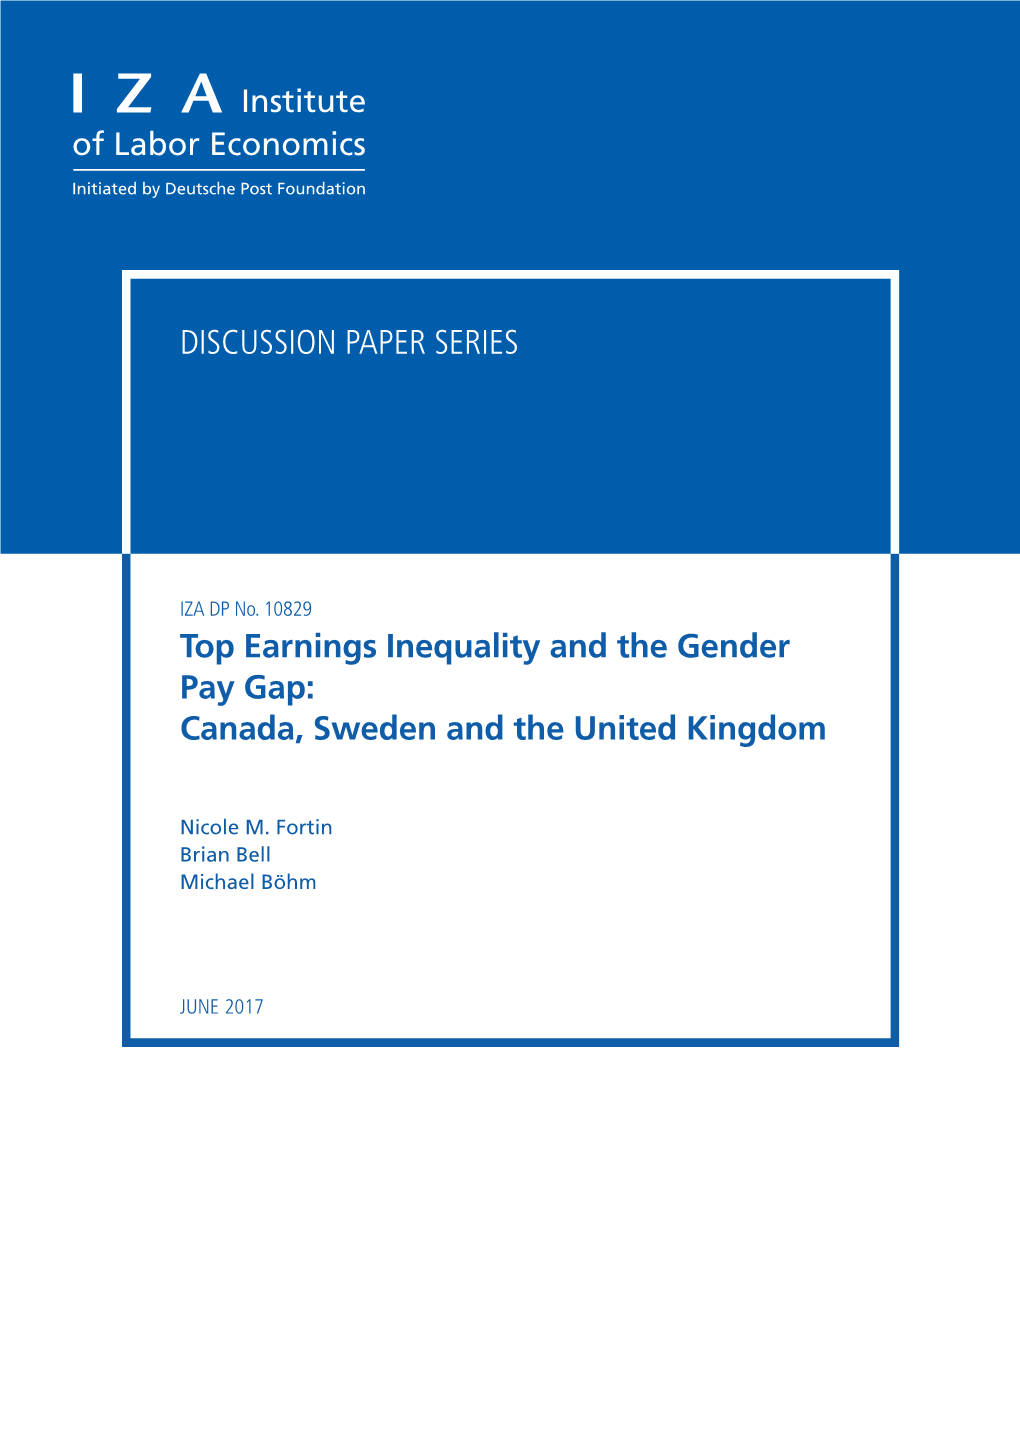 Top Earnings Inequality and the Gender Pay Gap: Canada, Sweden and the United Kingdom